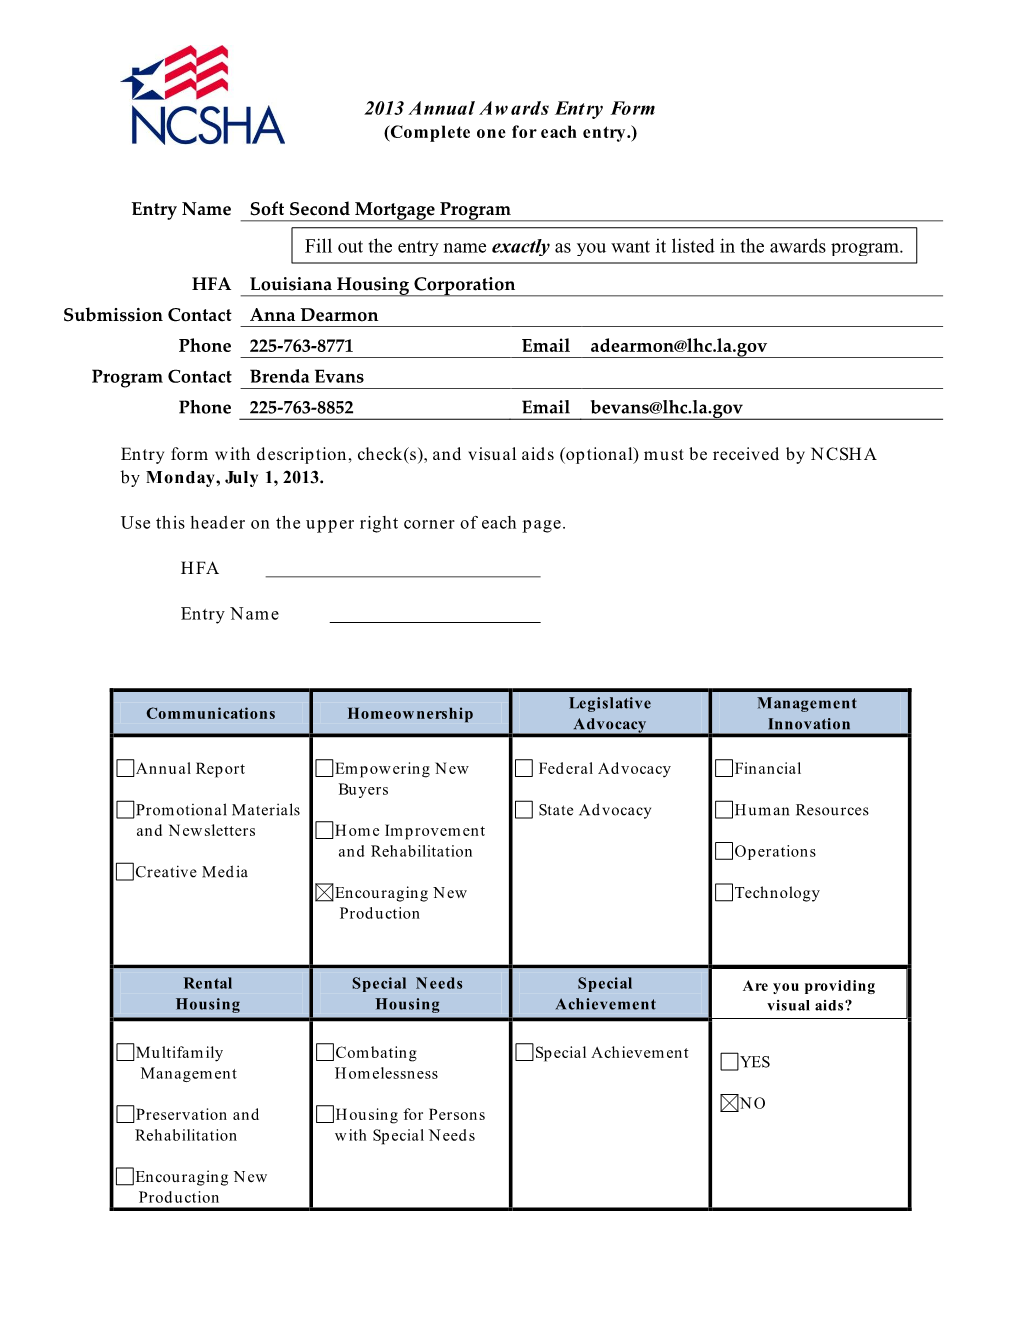 2013 Annual Aw Ards Entry Form Fill out the Entry Name Exactly As You